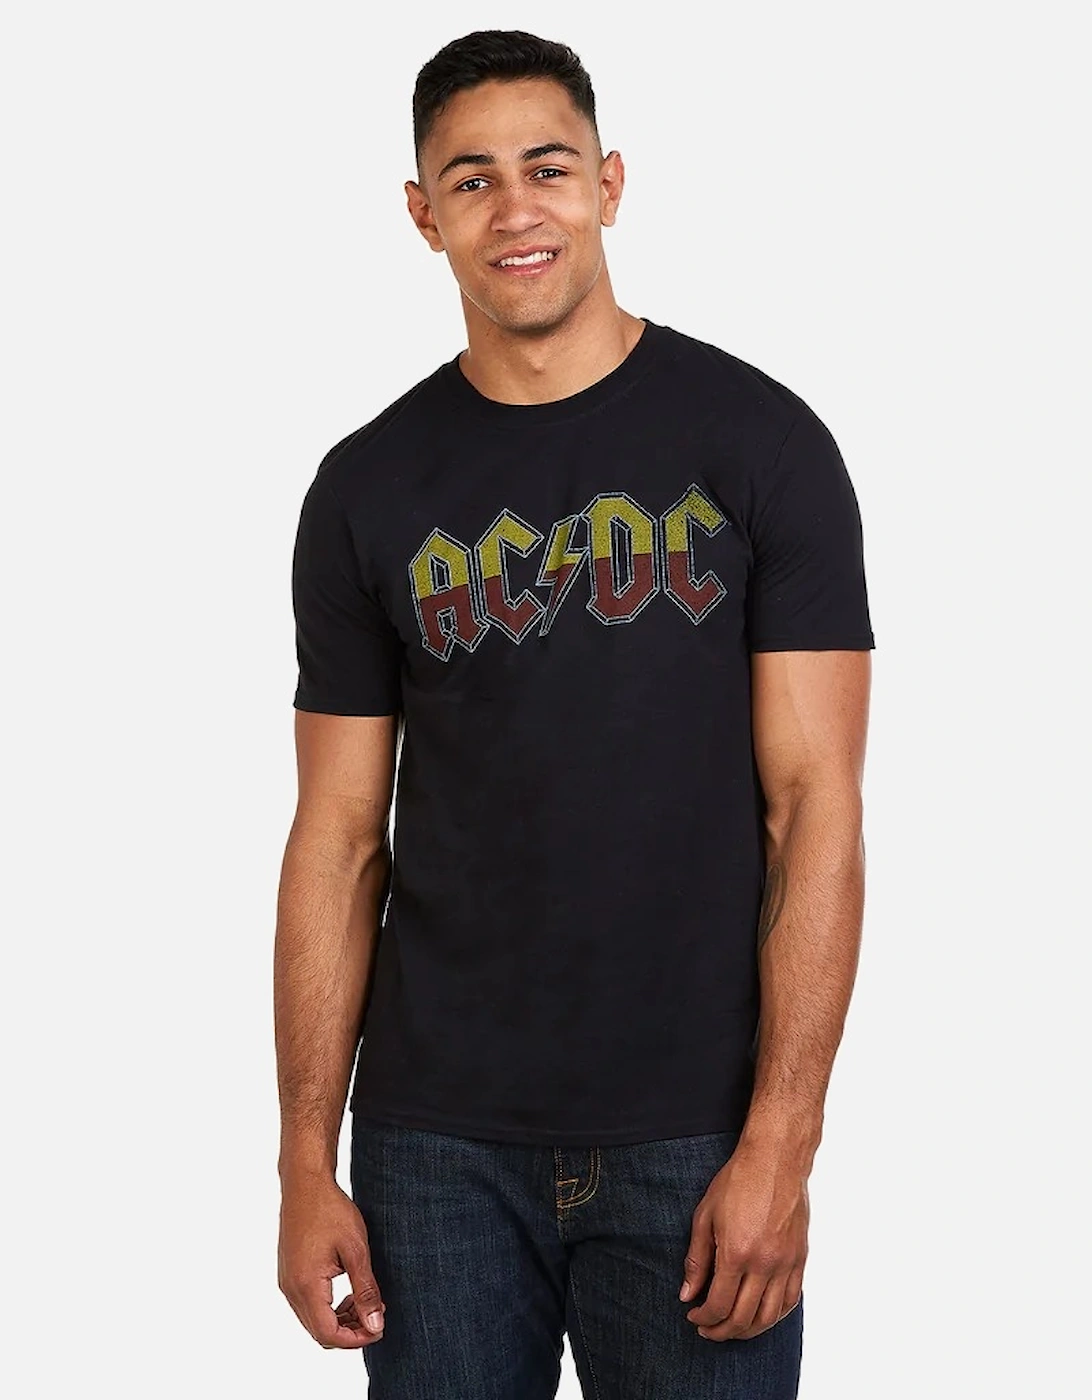 Boys About To Rock Tour T-Shirt